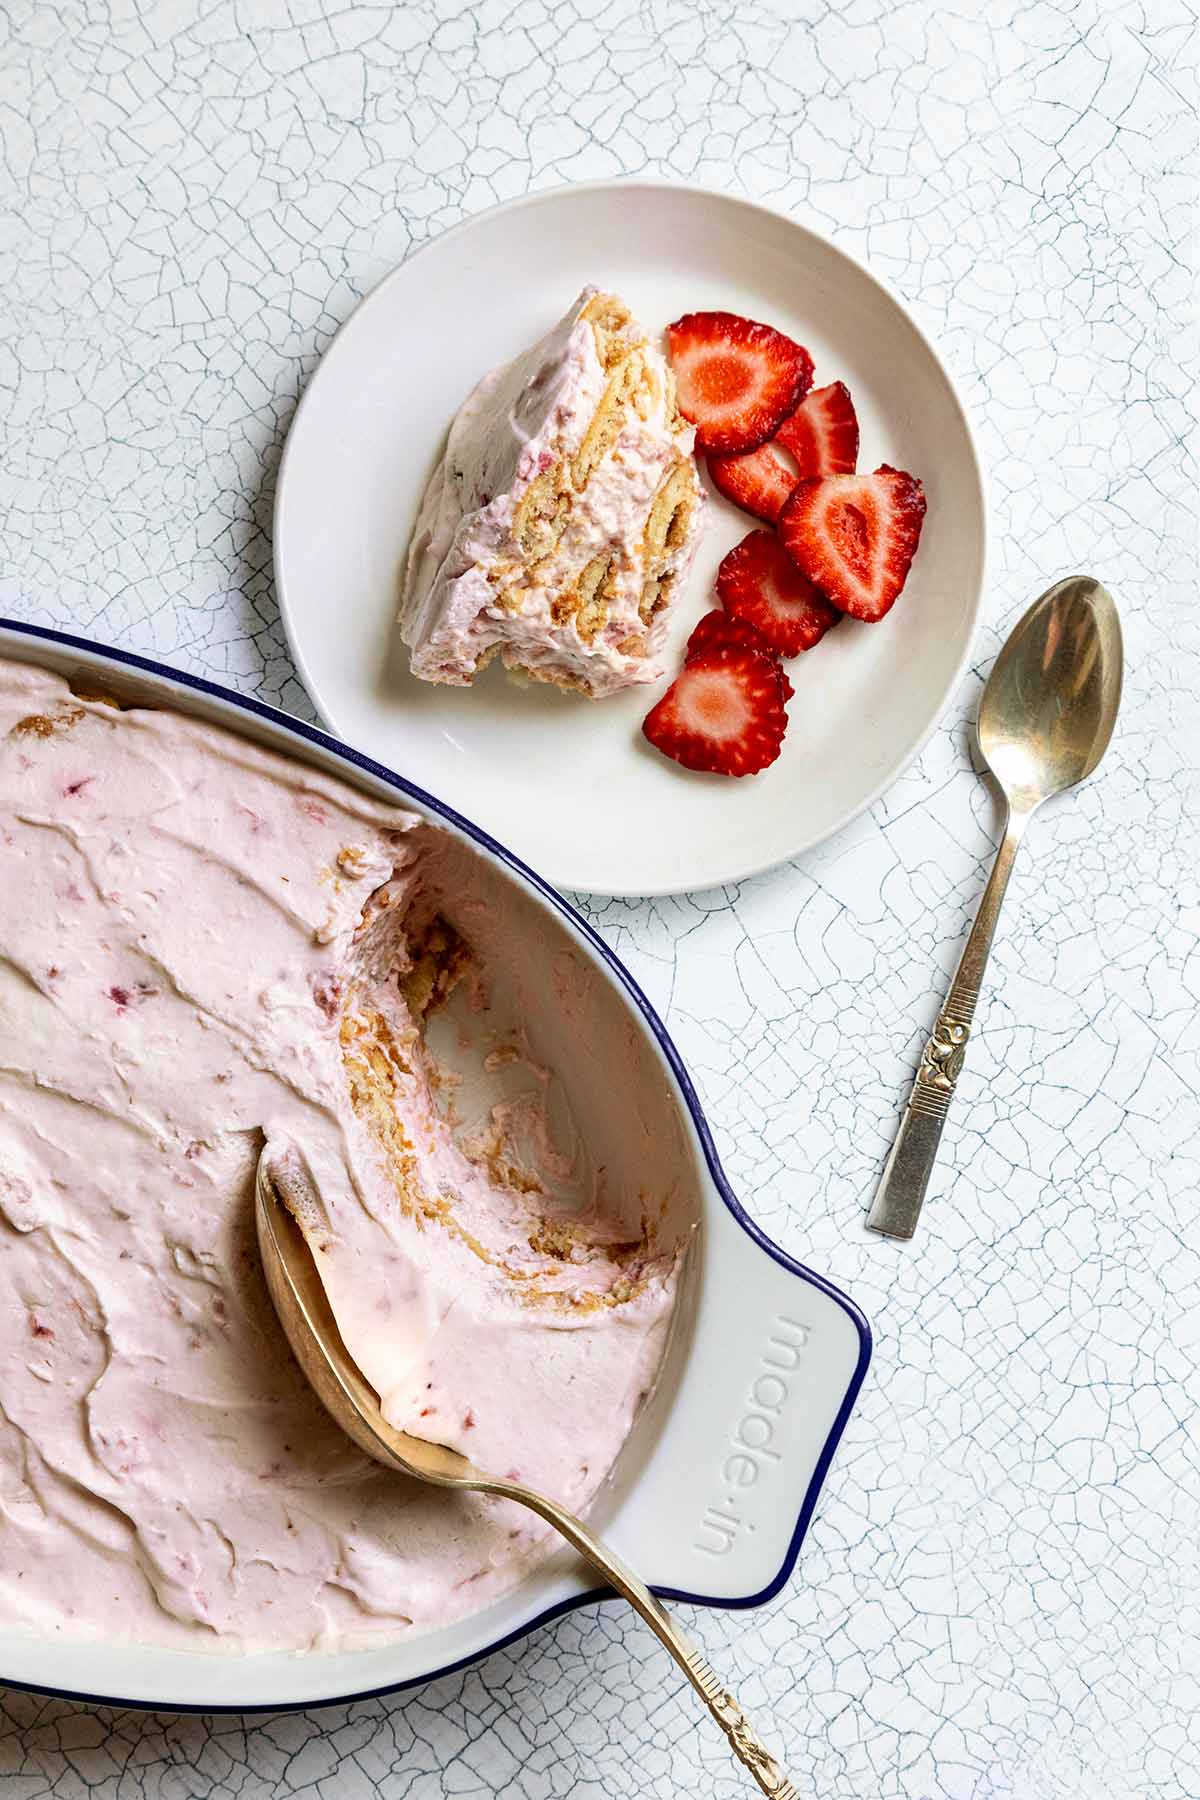 A serving of strawberry icebox cake next to an oval baking dish filled with the remaining dessert.